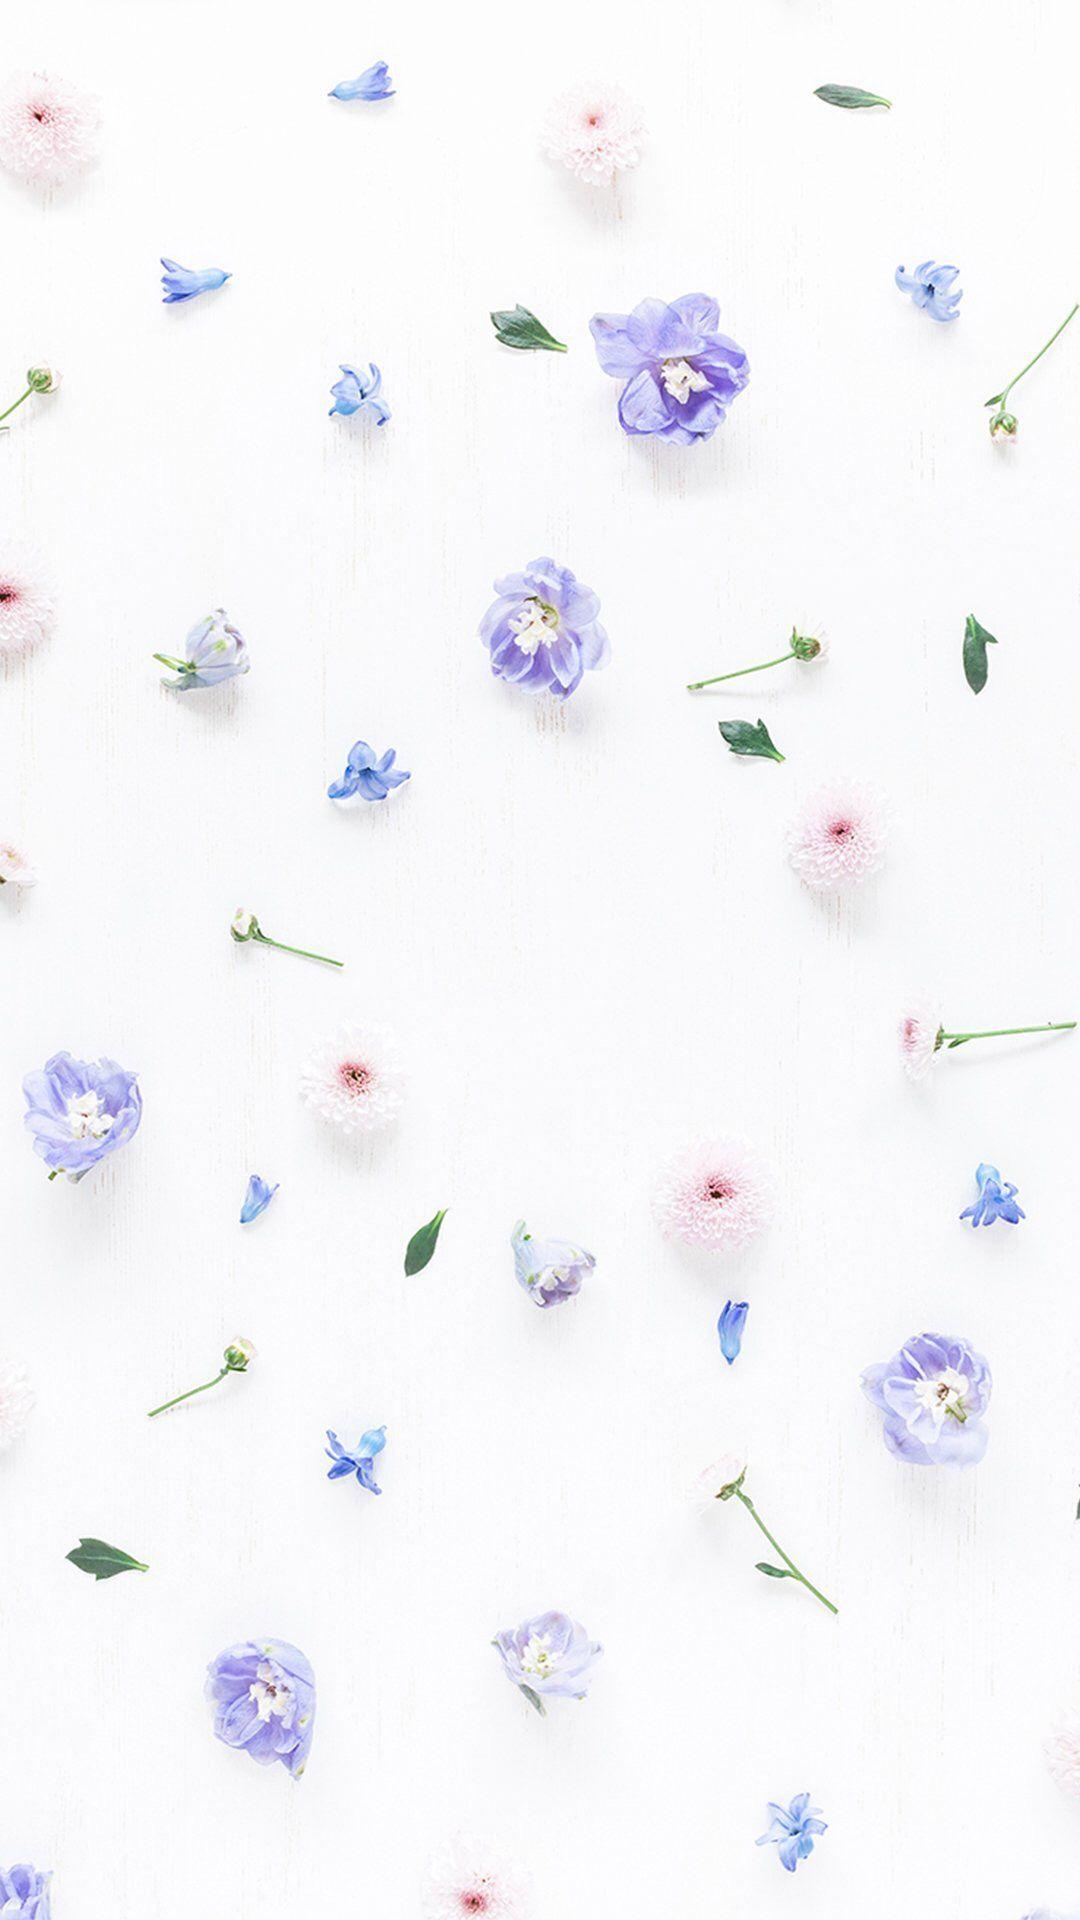 61+ Floral Spring iPhone Wallpapers: HD, 4K, 5K for PC and Mobile |  Download free images for iPhone, Android